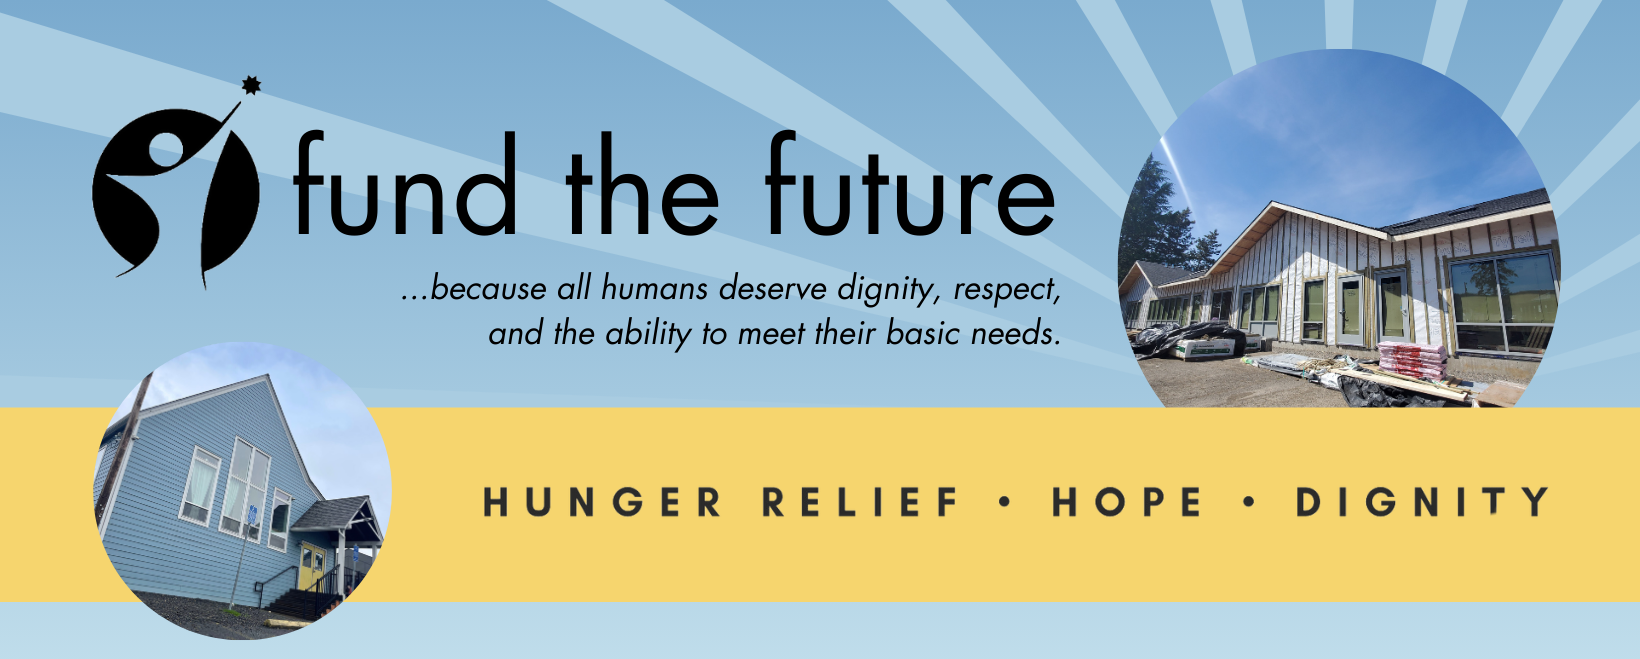 Fund the future... because all humans deserve dignity, respect, and the ability to meet their basic needs